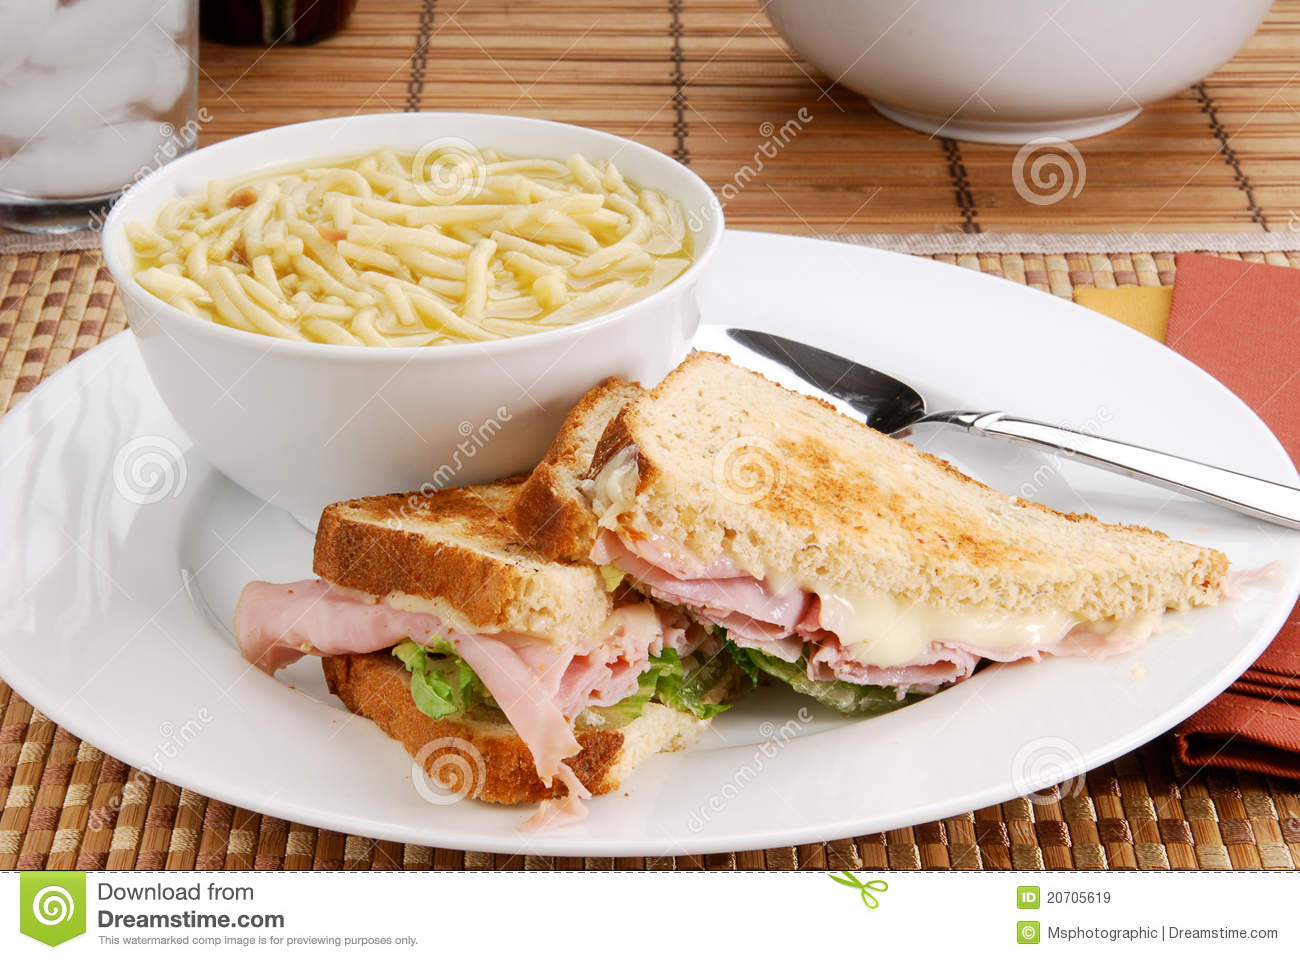 Soup And Sandwich Royalty Free Stock Images   Image  20705619